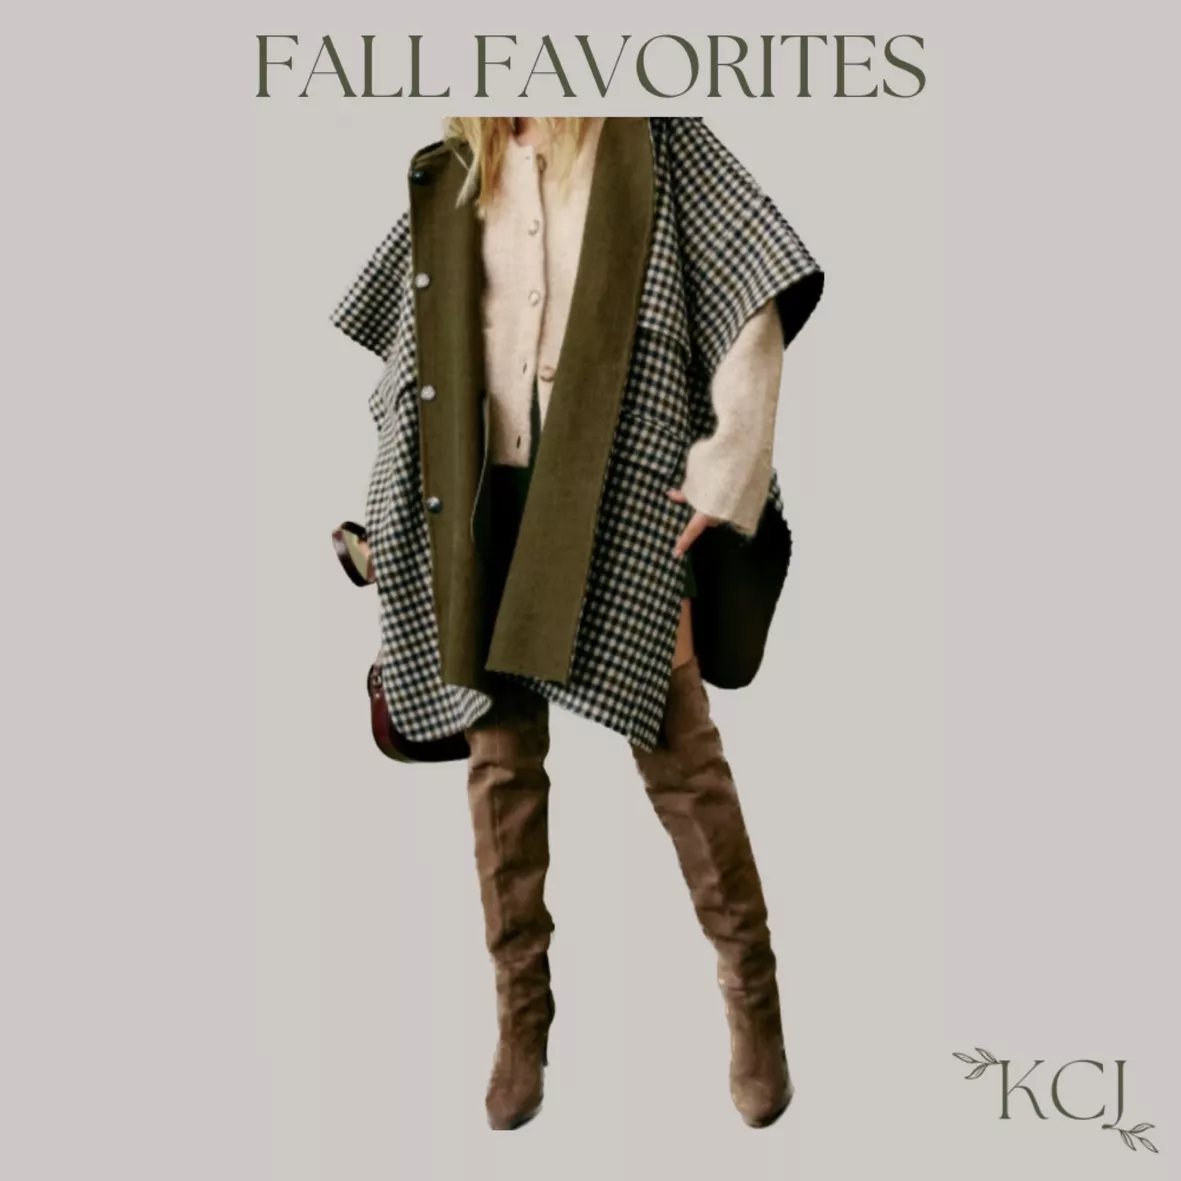 Fall Favorites Collection